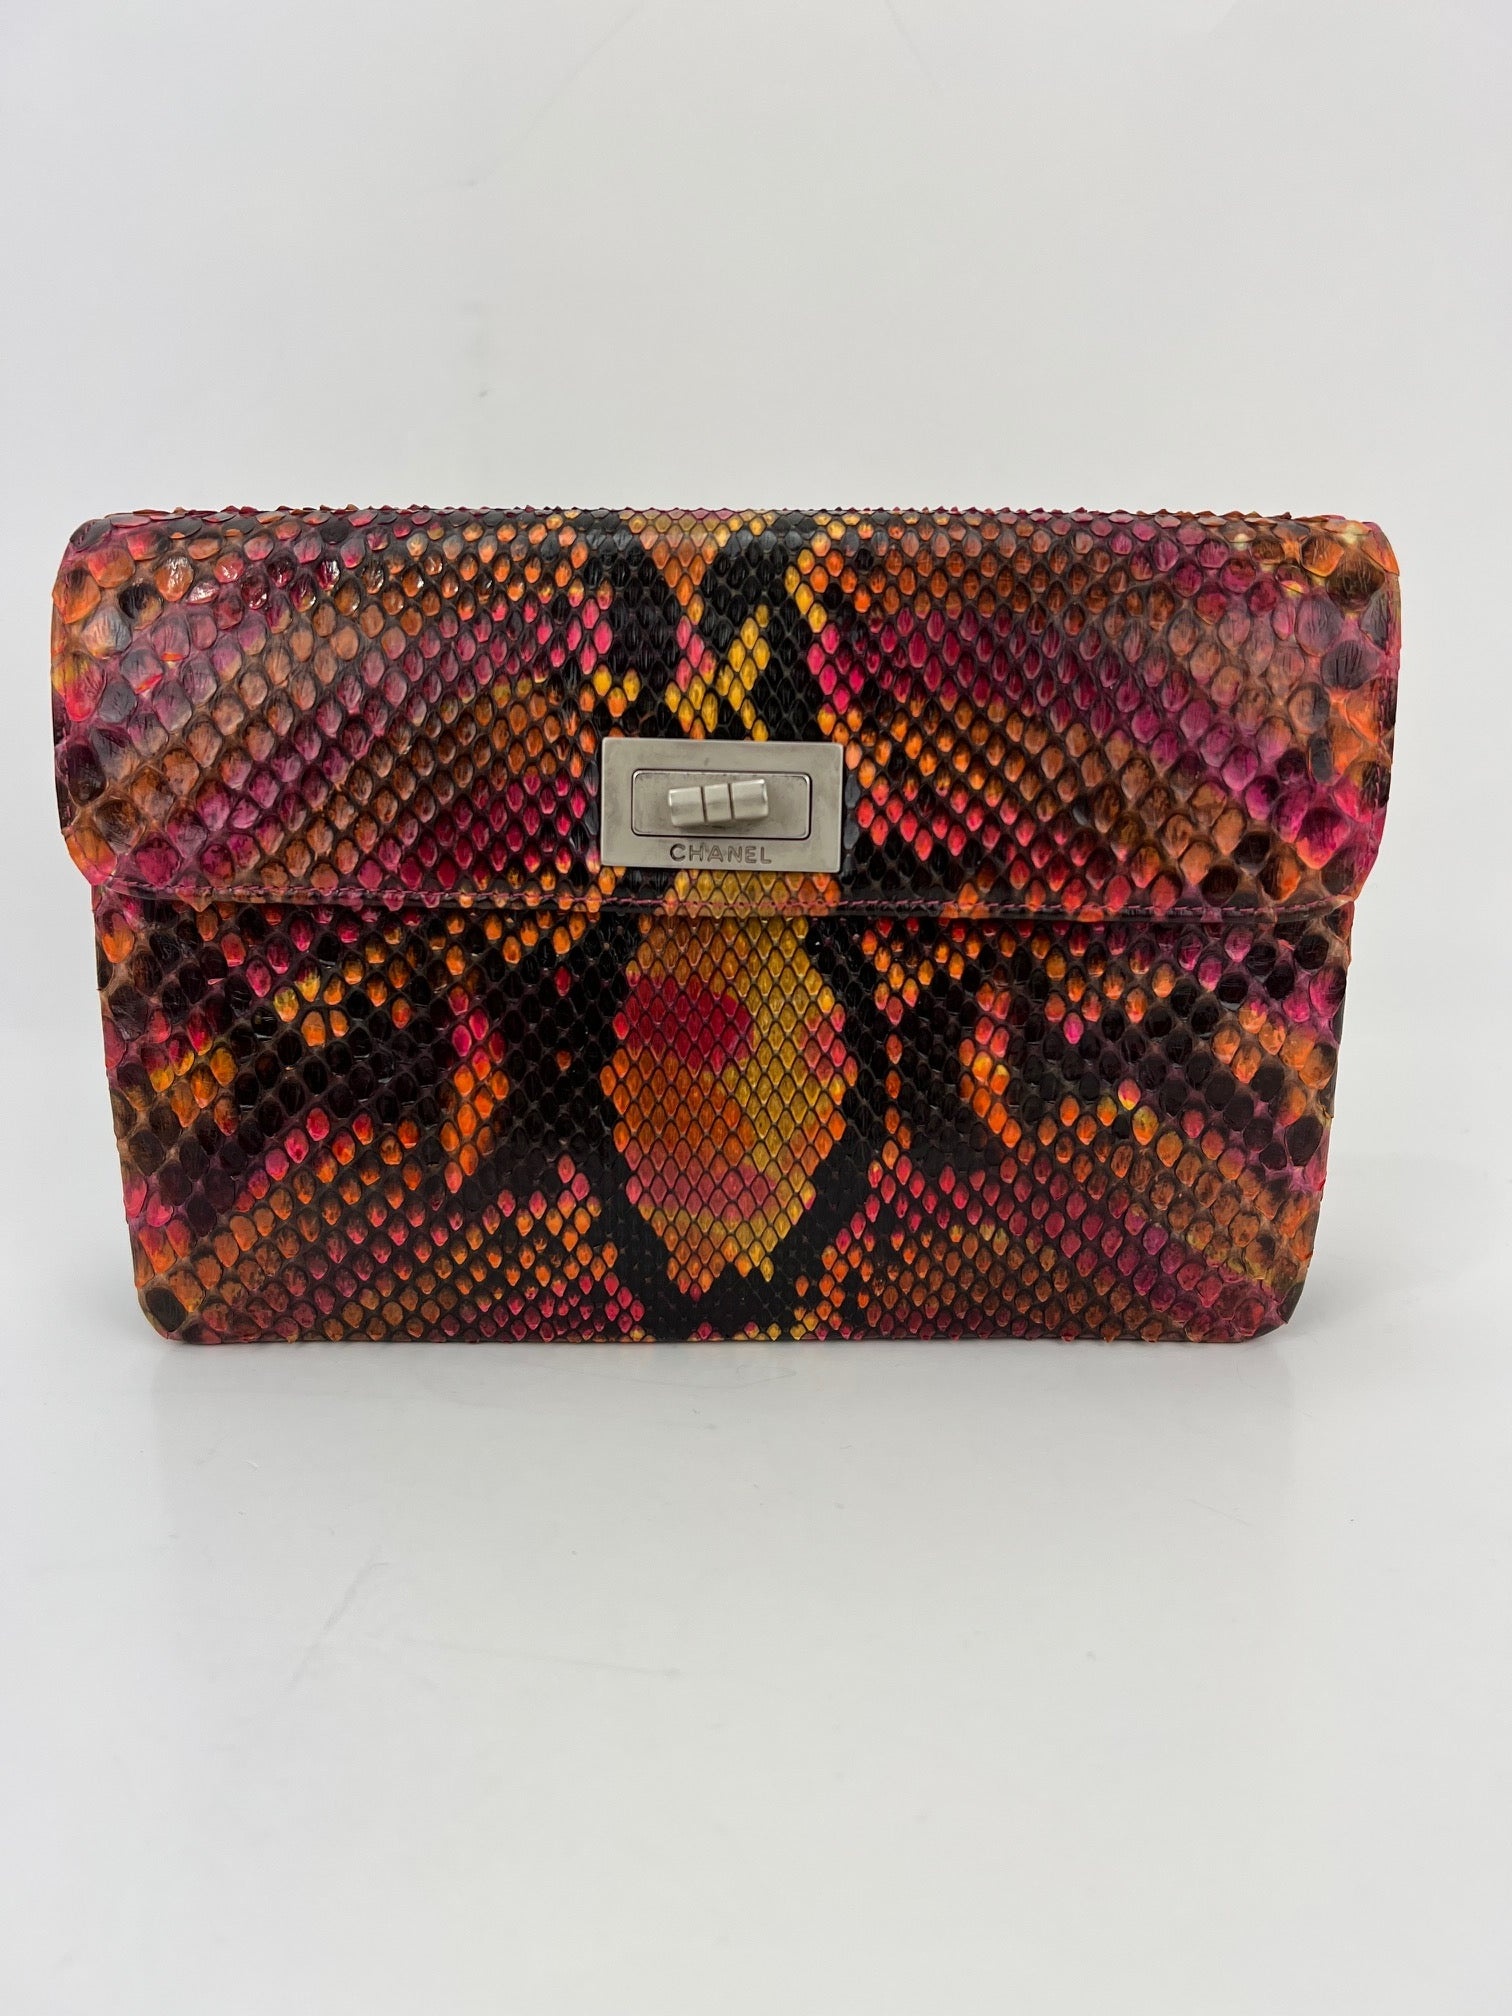 CHANEL Clutch Pink Multicolor Python Leather Flap Shoulder Bag Added Chain  Preowned